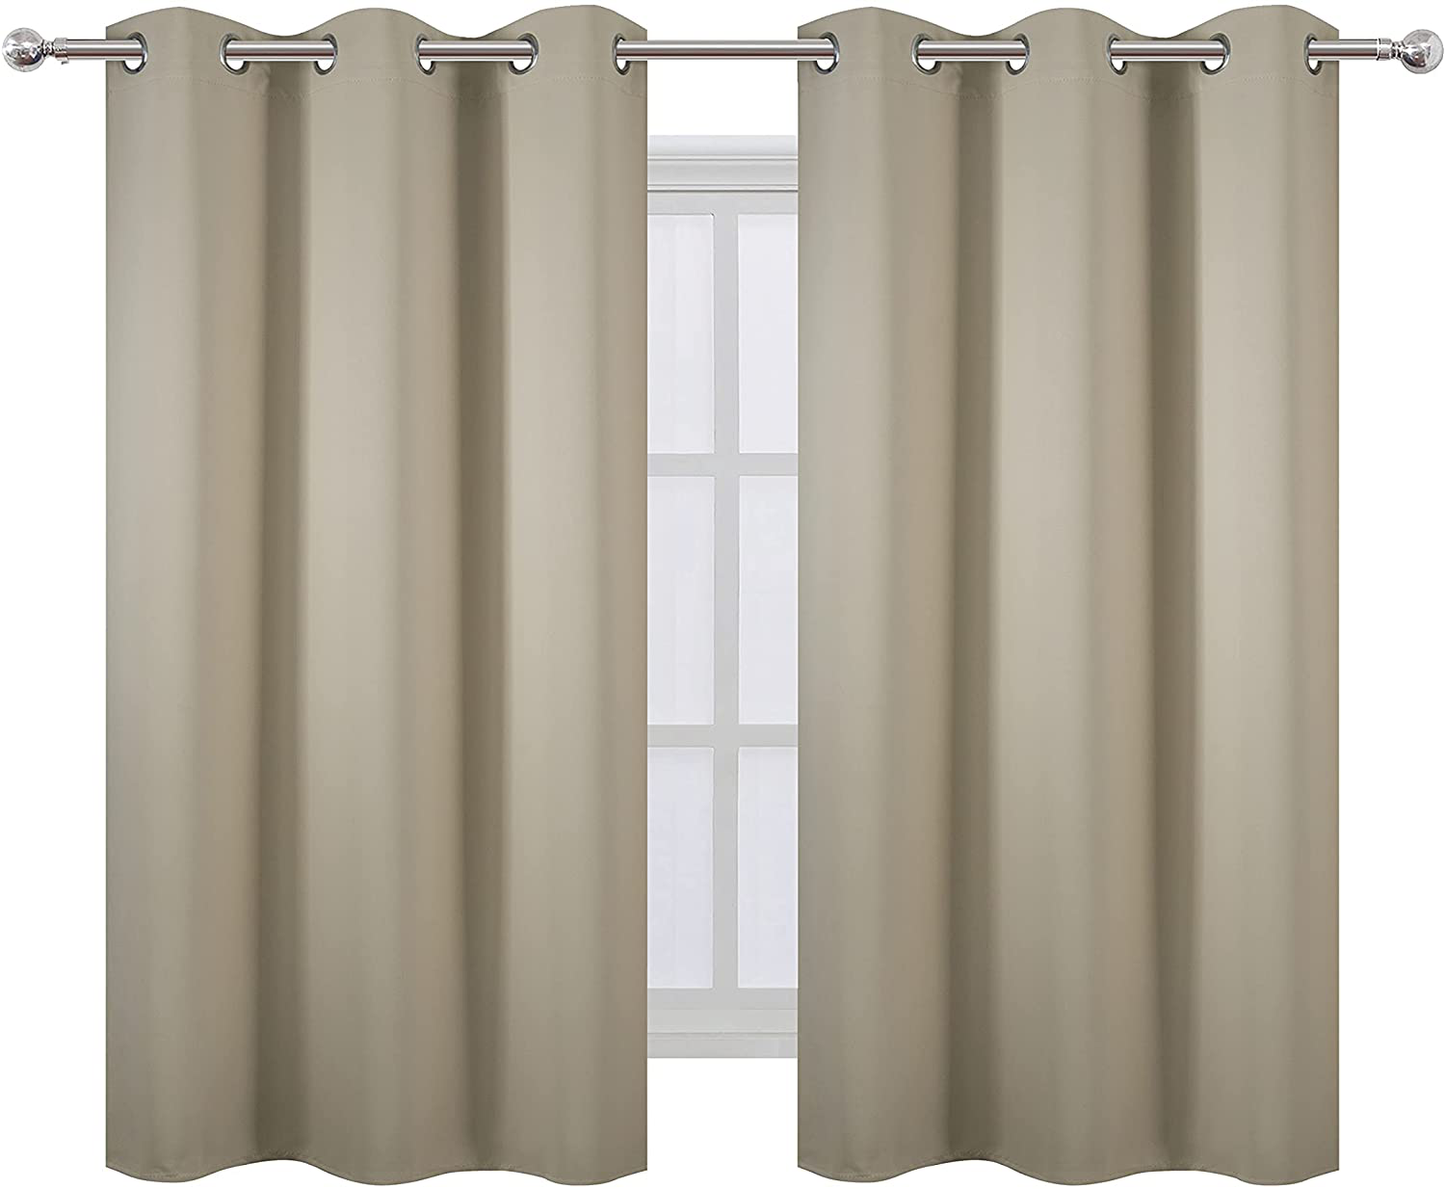 LEMOMO Chocolate Brown Thermal Blackout Curtains/38 x 63 Inch/Set of 2 Panels Room Darkening Curtains for Bedroom